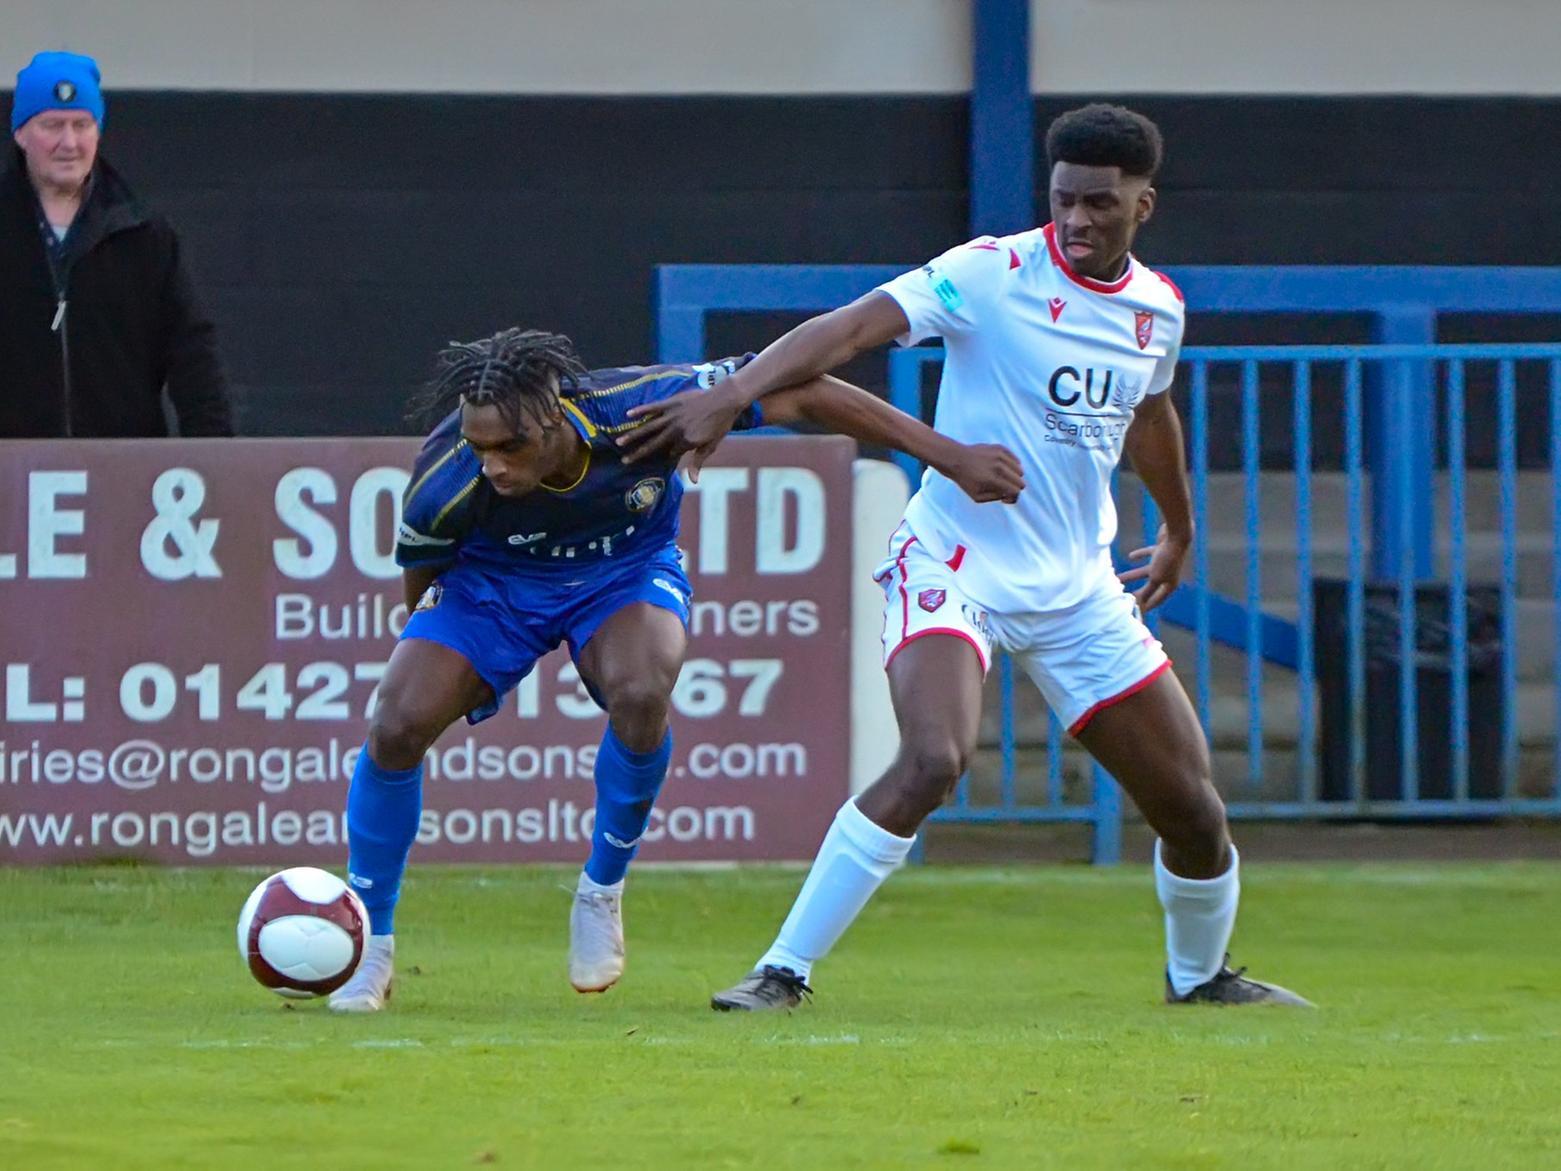 Gainsborough Trinity 2-3 Scarborough Athletic / BetVictor NPL / Pictures by John Rudkin